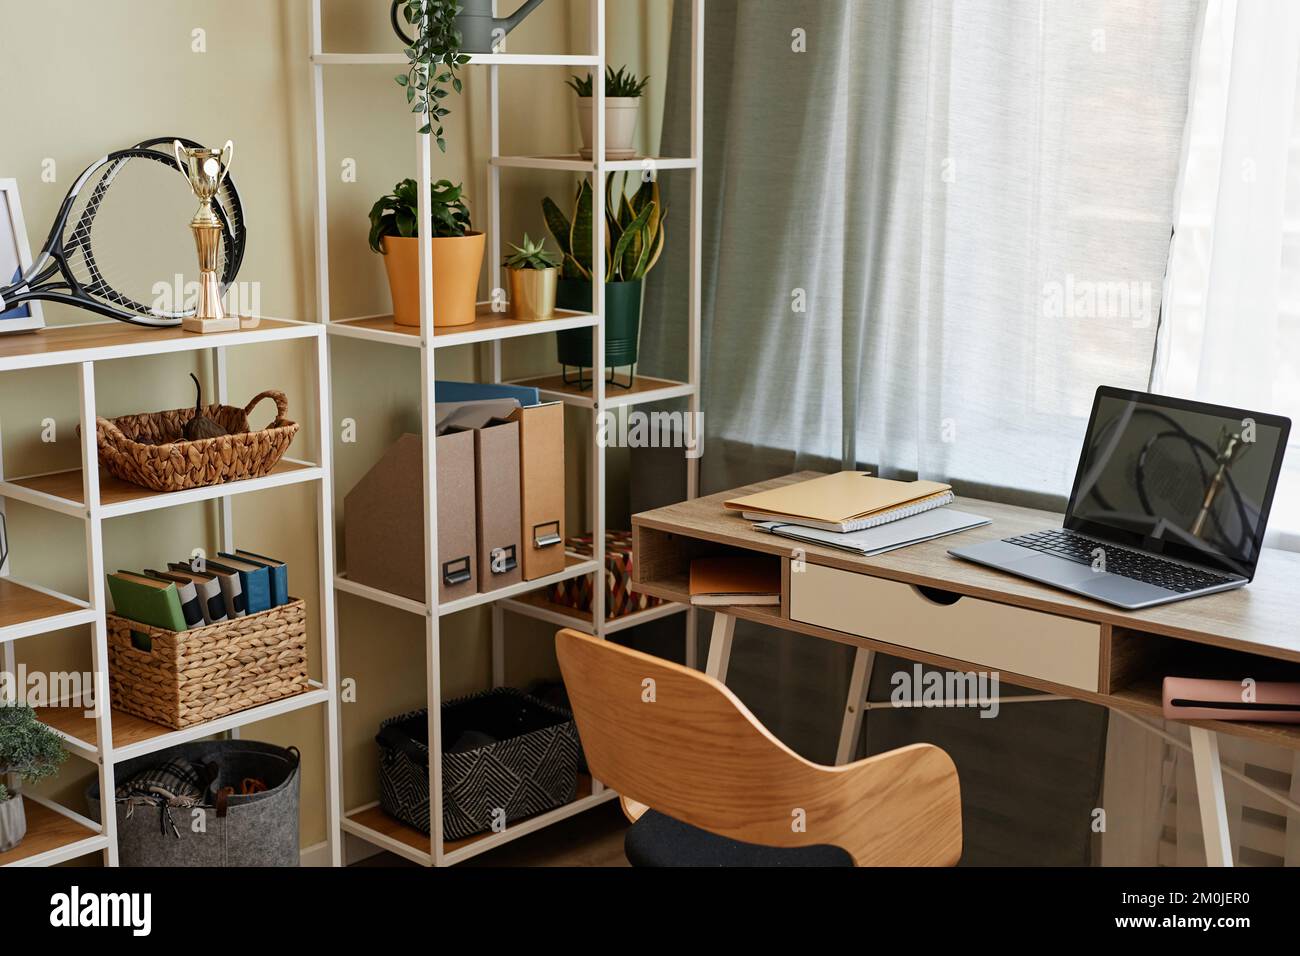 Background image of cozy home office workplace with wooden details and metal shelves with decor items, copy space Stock Photo